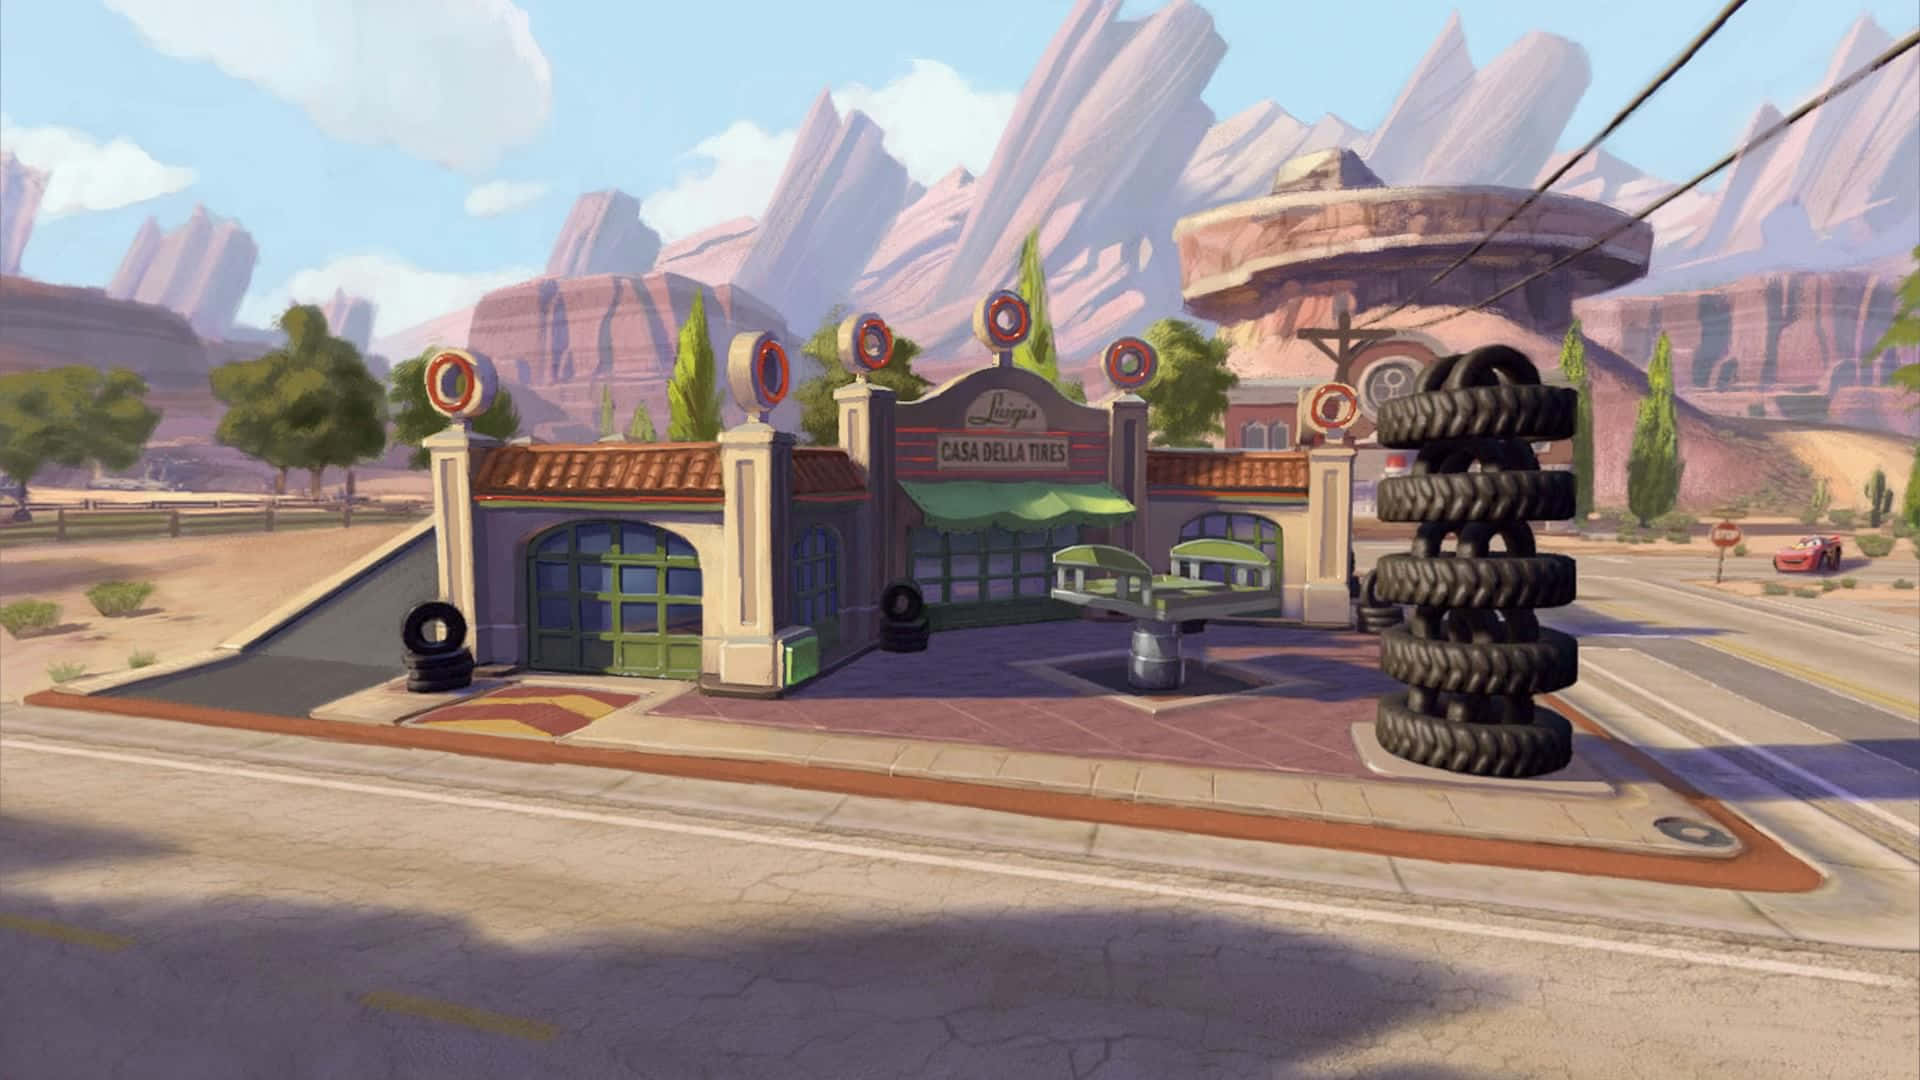 Download Explore Radiator Springs and find fun adventure and beauty  Wallpaper  Wallpaperscom